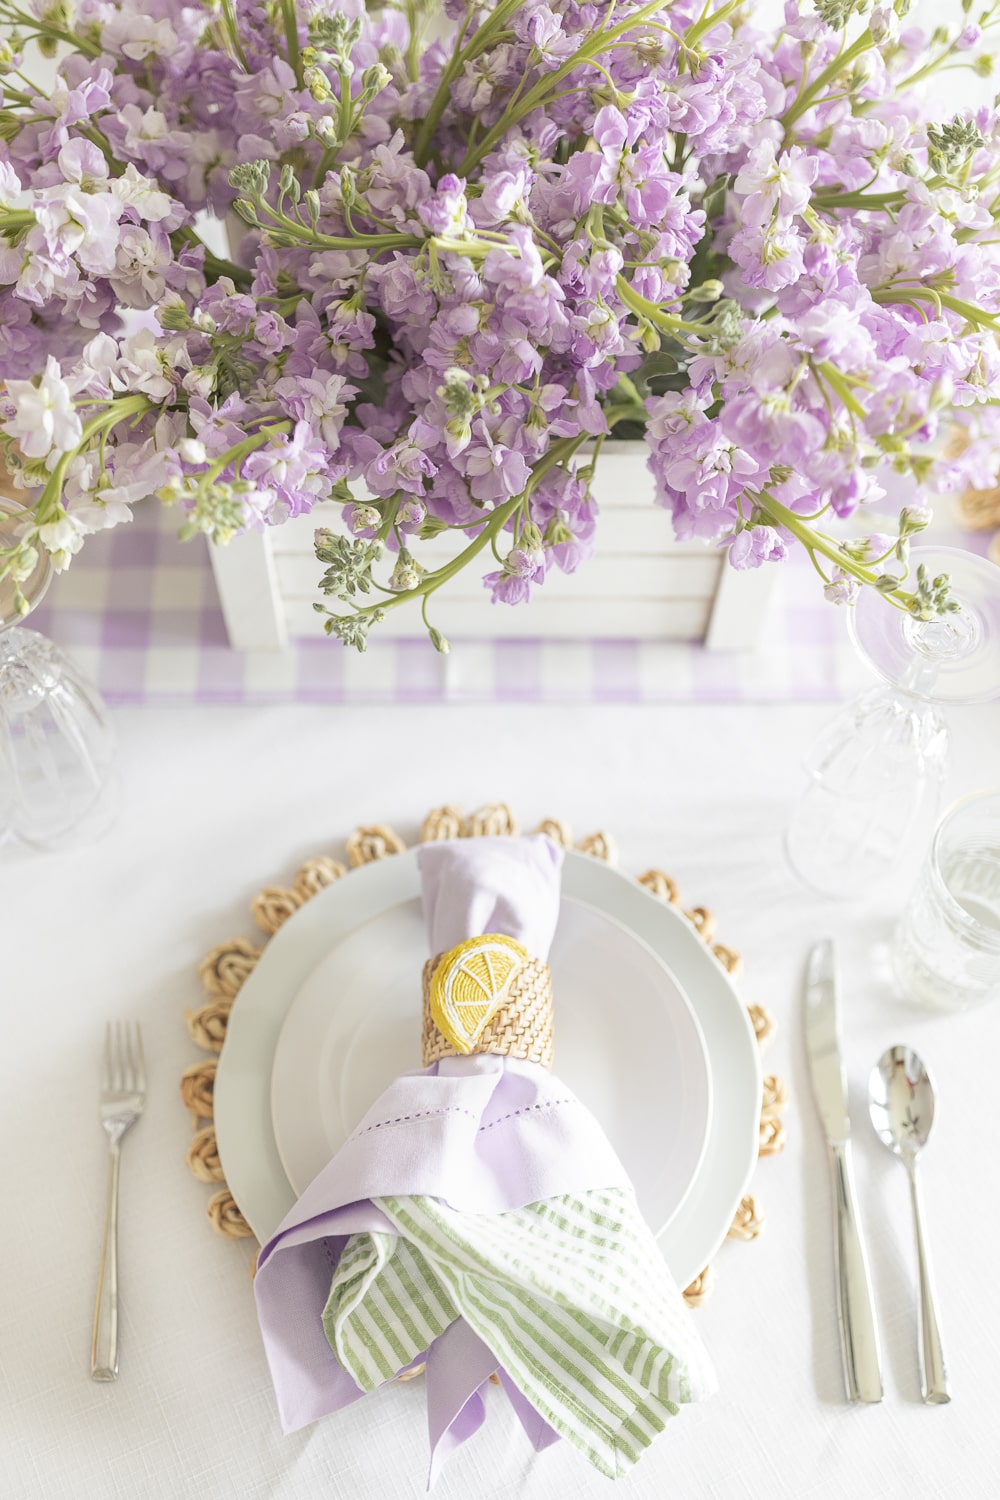 Mother's Day table setting ideas from blogger Stephanie Ziajka on Diary of a Debutante